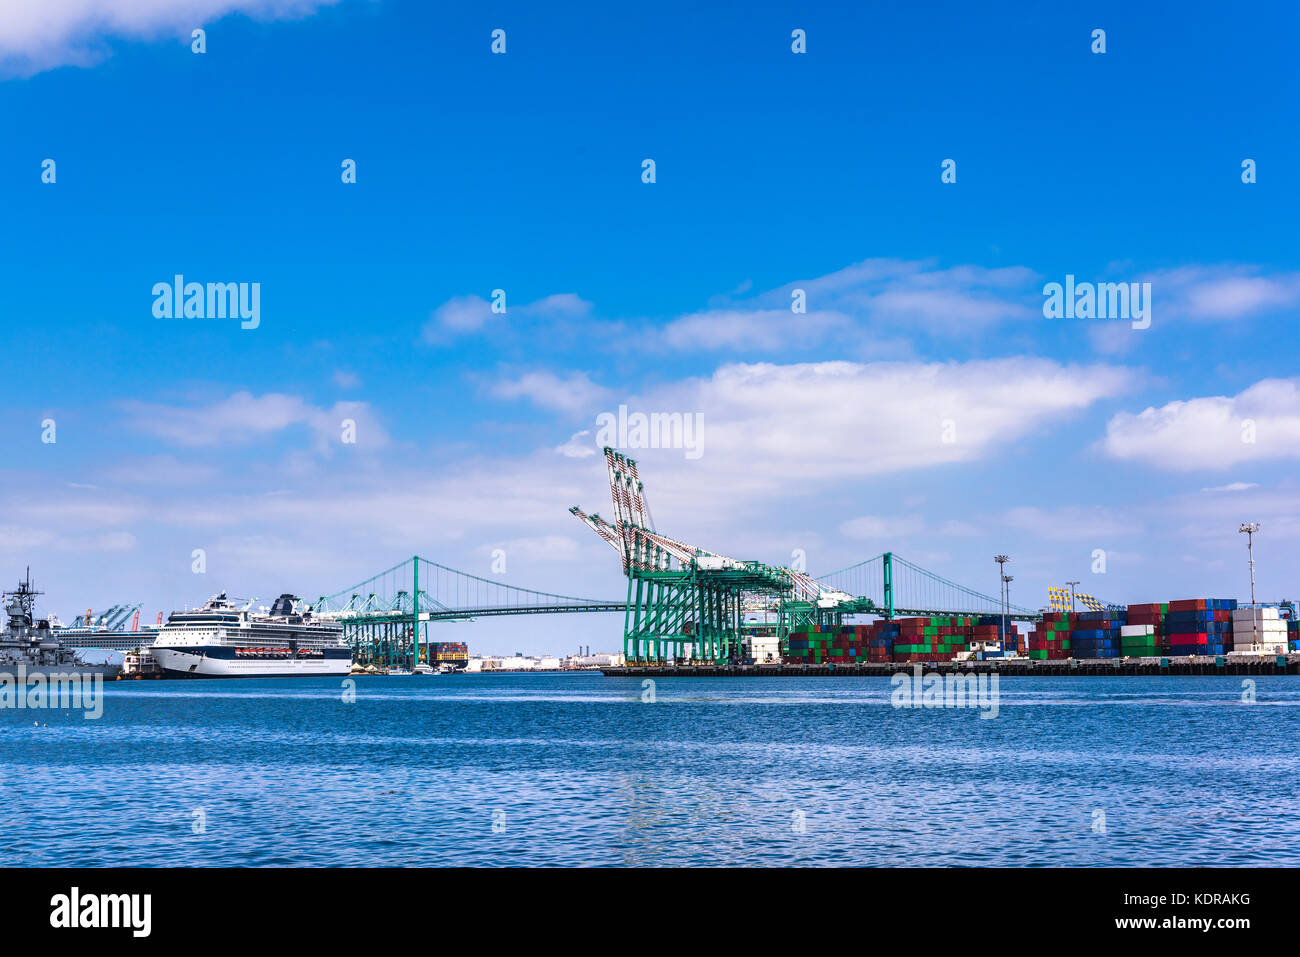 A cruise ship docked in ports of call in Long Beach California shows a heavy commerce transportation hub during a bright, sunny day. Stock Photo